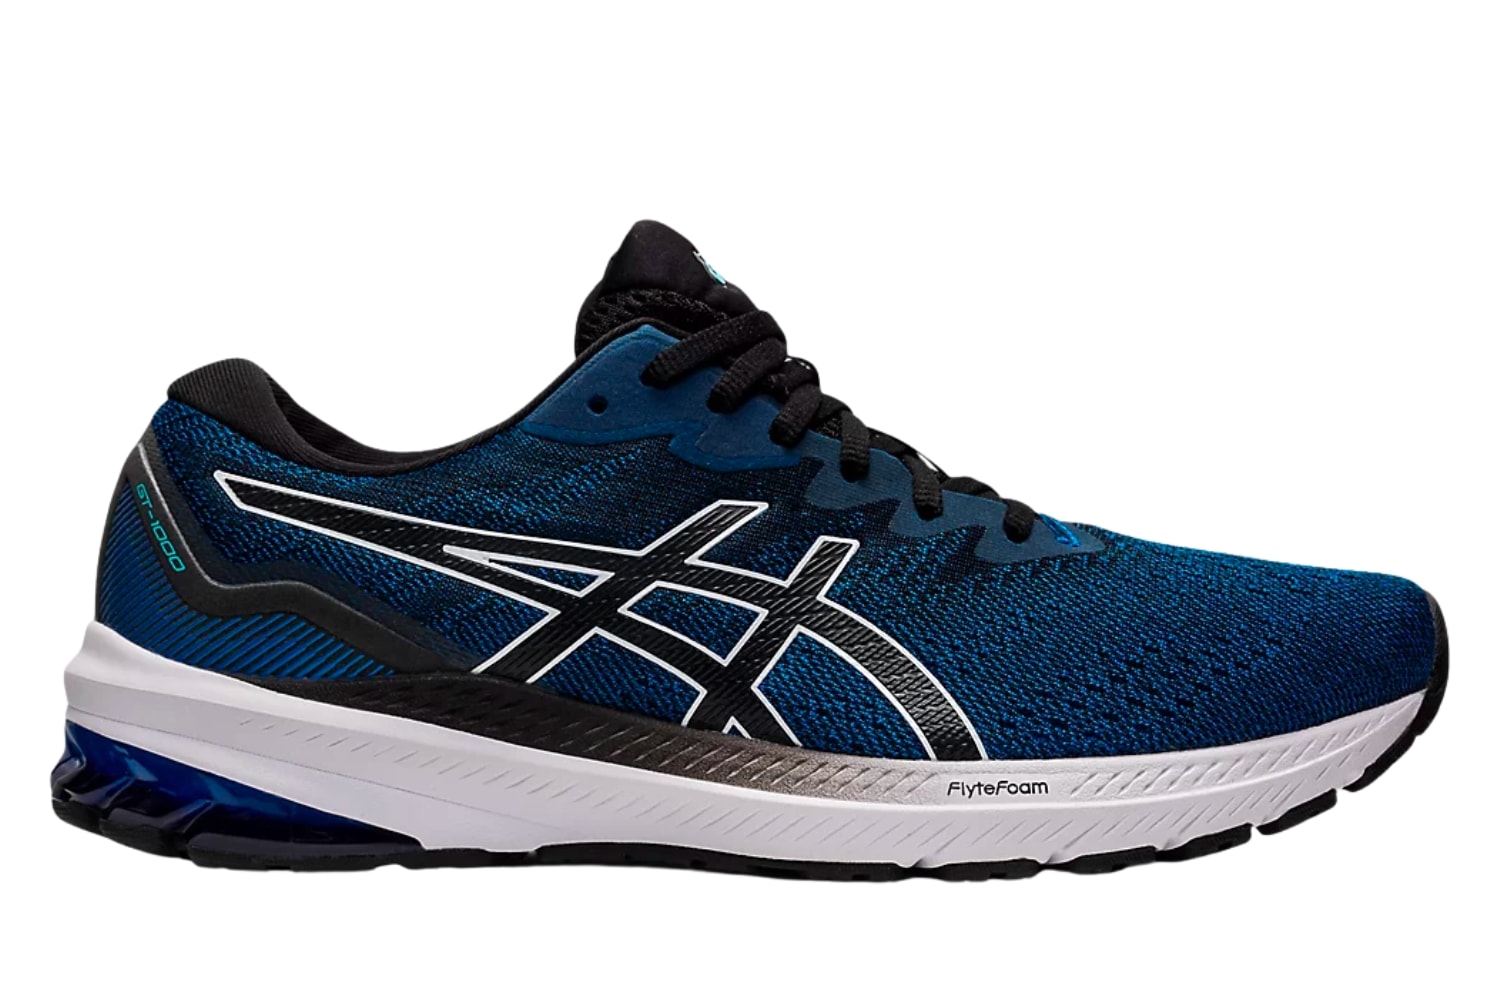 Asics GT 1000 11 Review (2022): Top Pick for Stability?